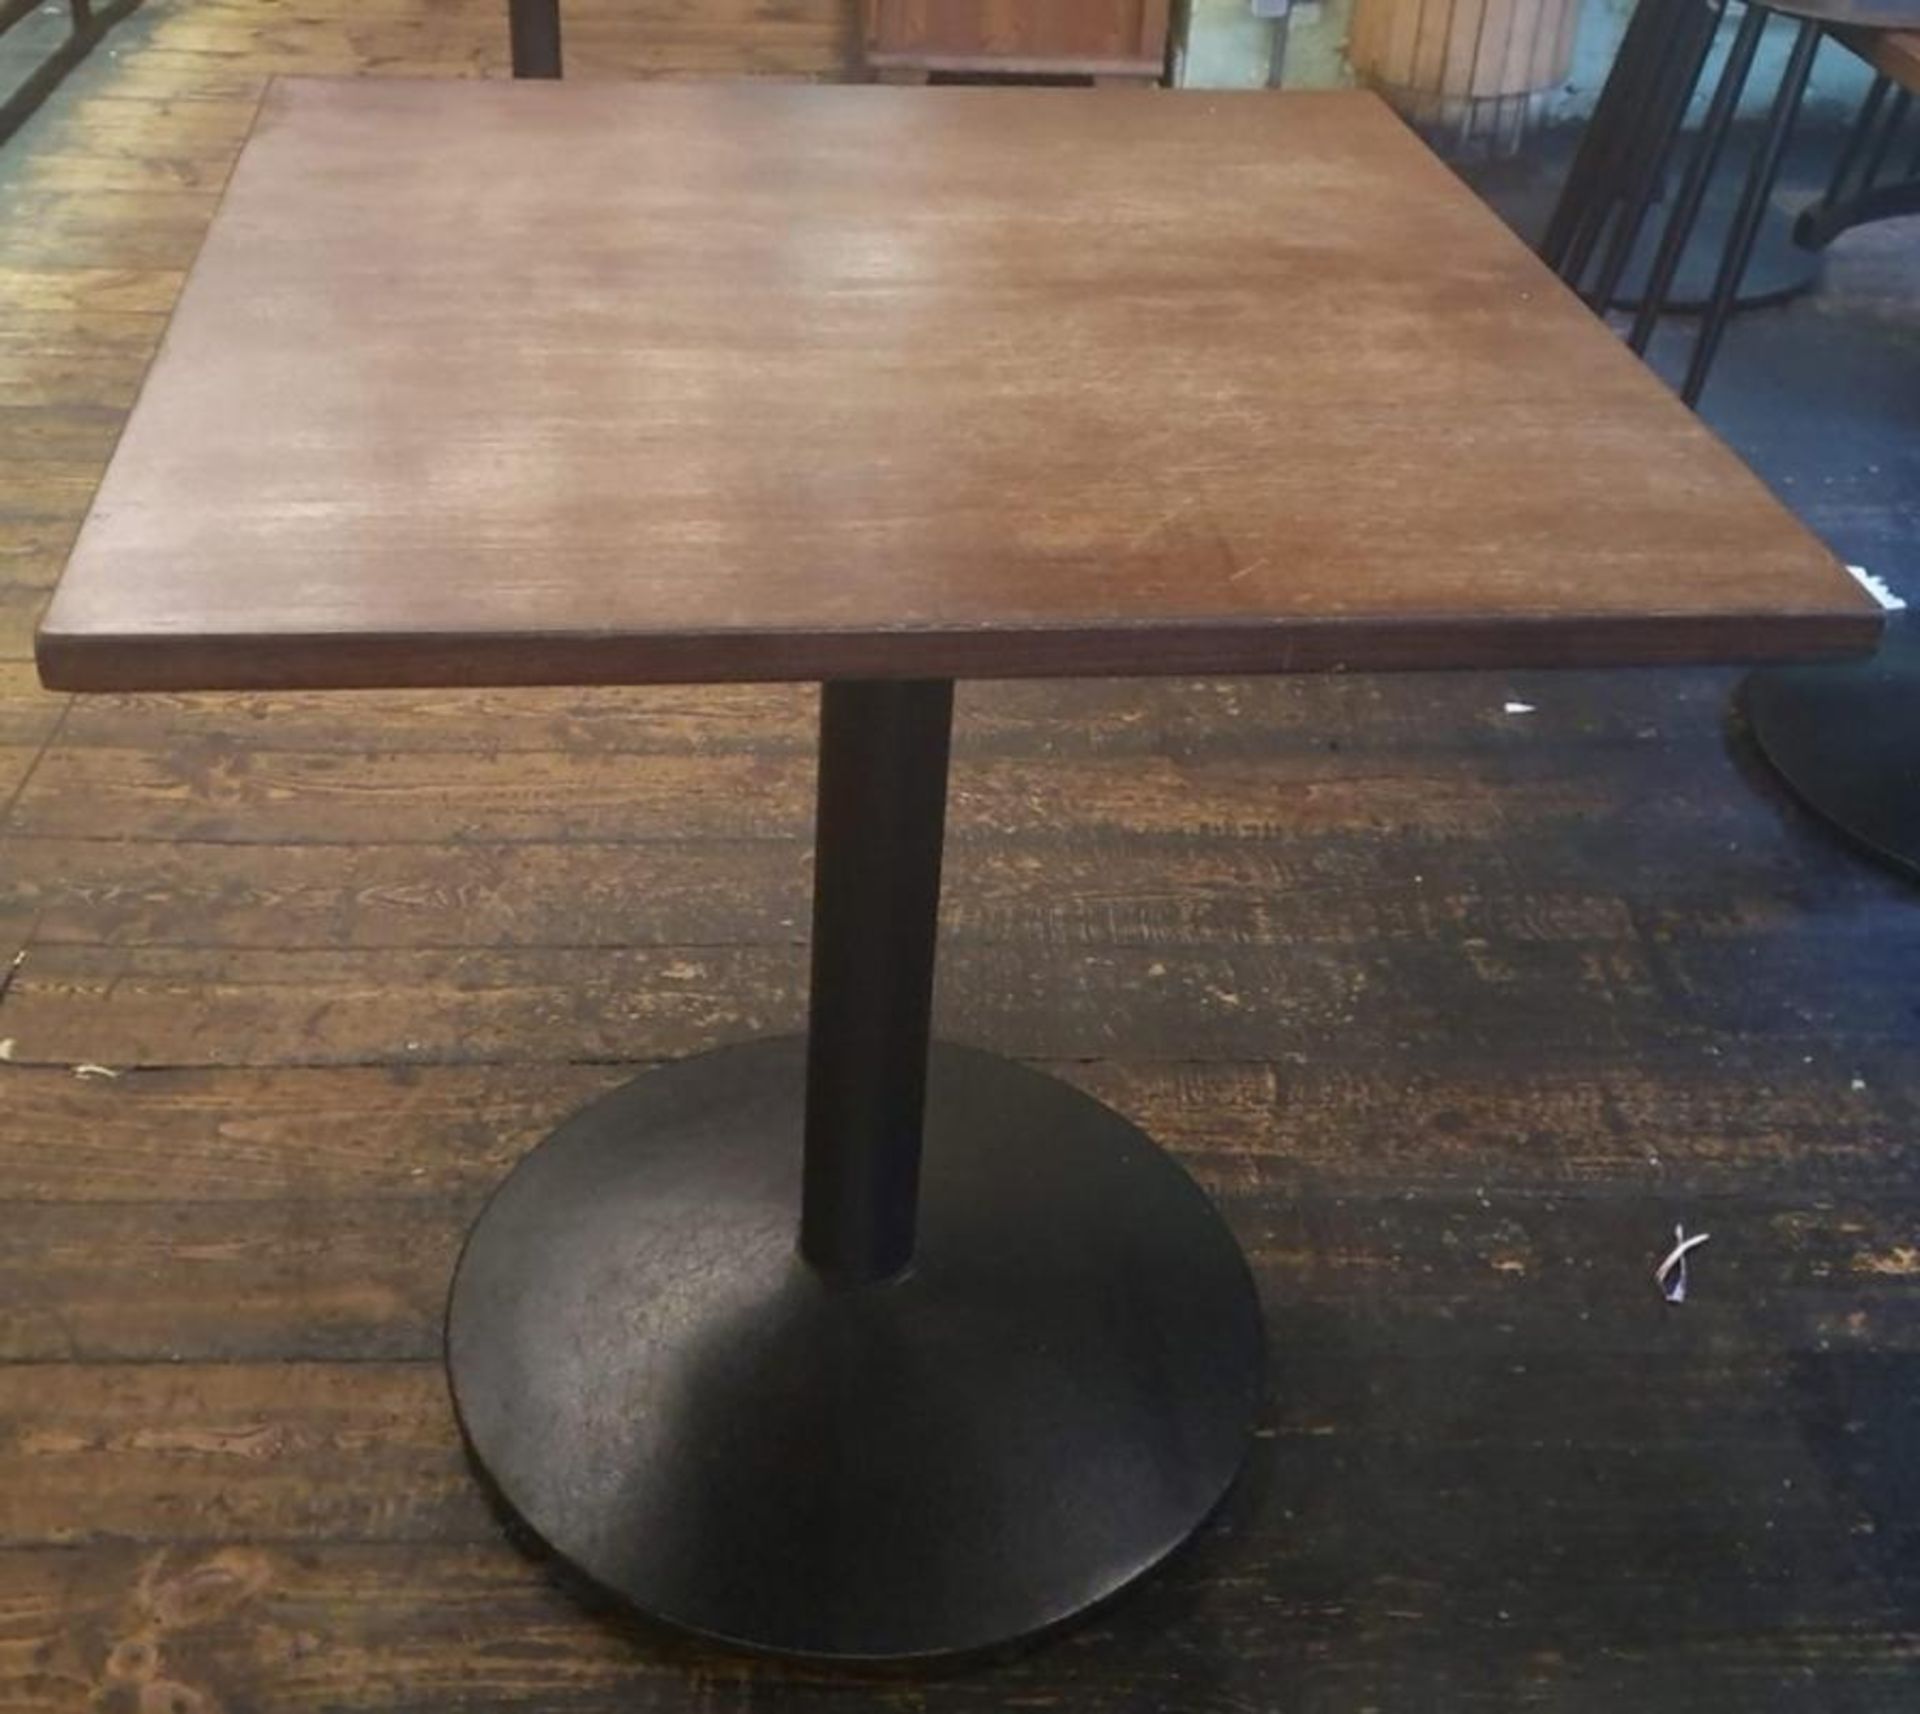 5 x Bistro Dining Tables - Dimensions: 70 x 70 x H74cm - Recently Taken From A Contemporary Caribbea - Image 4 of 5